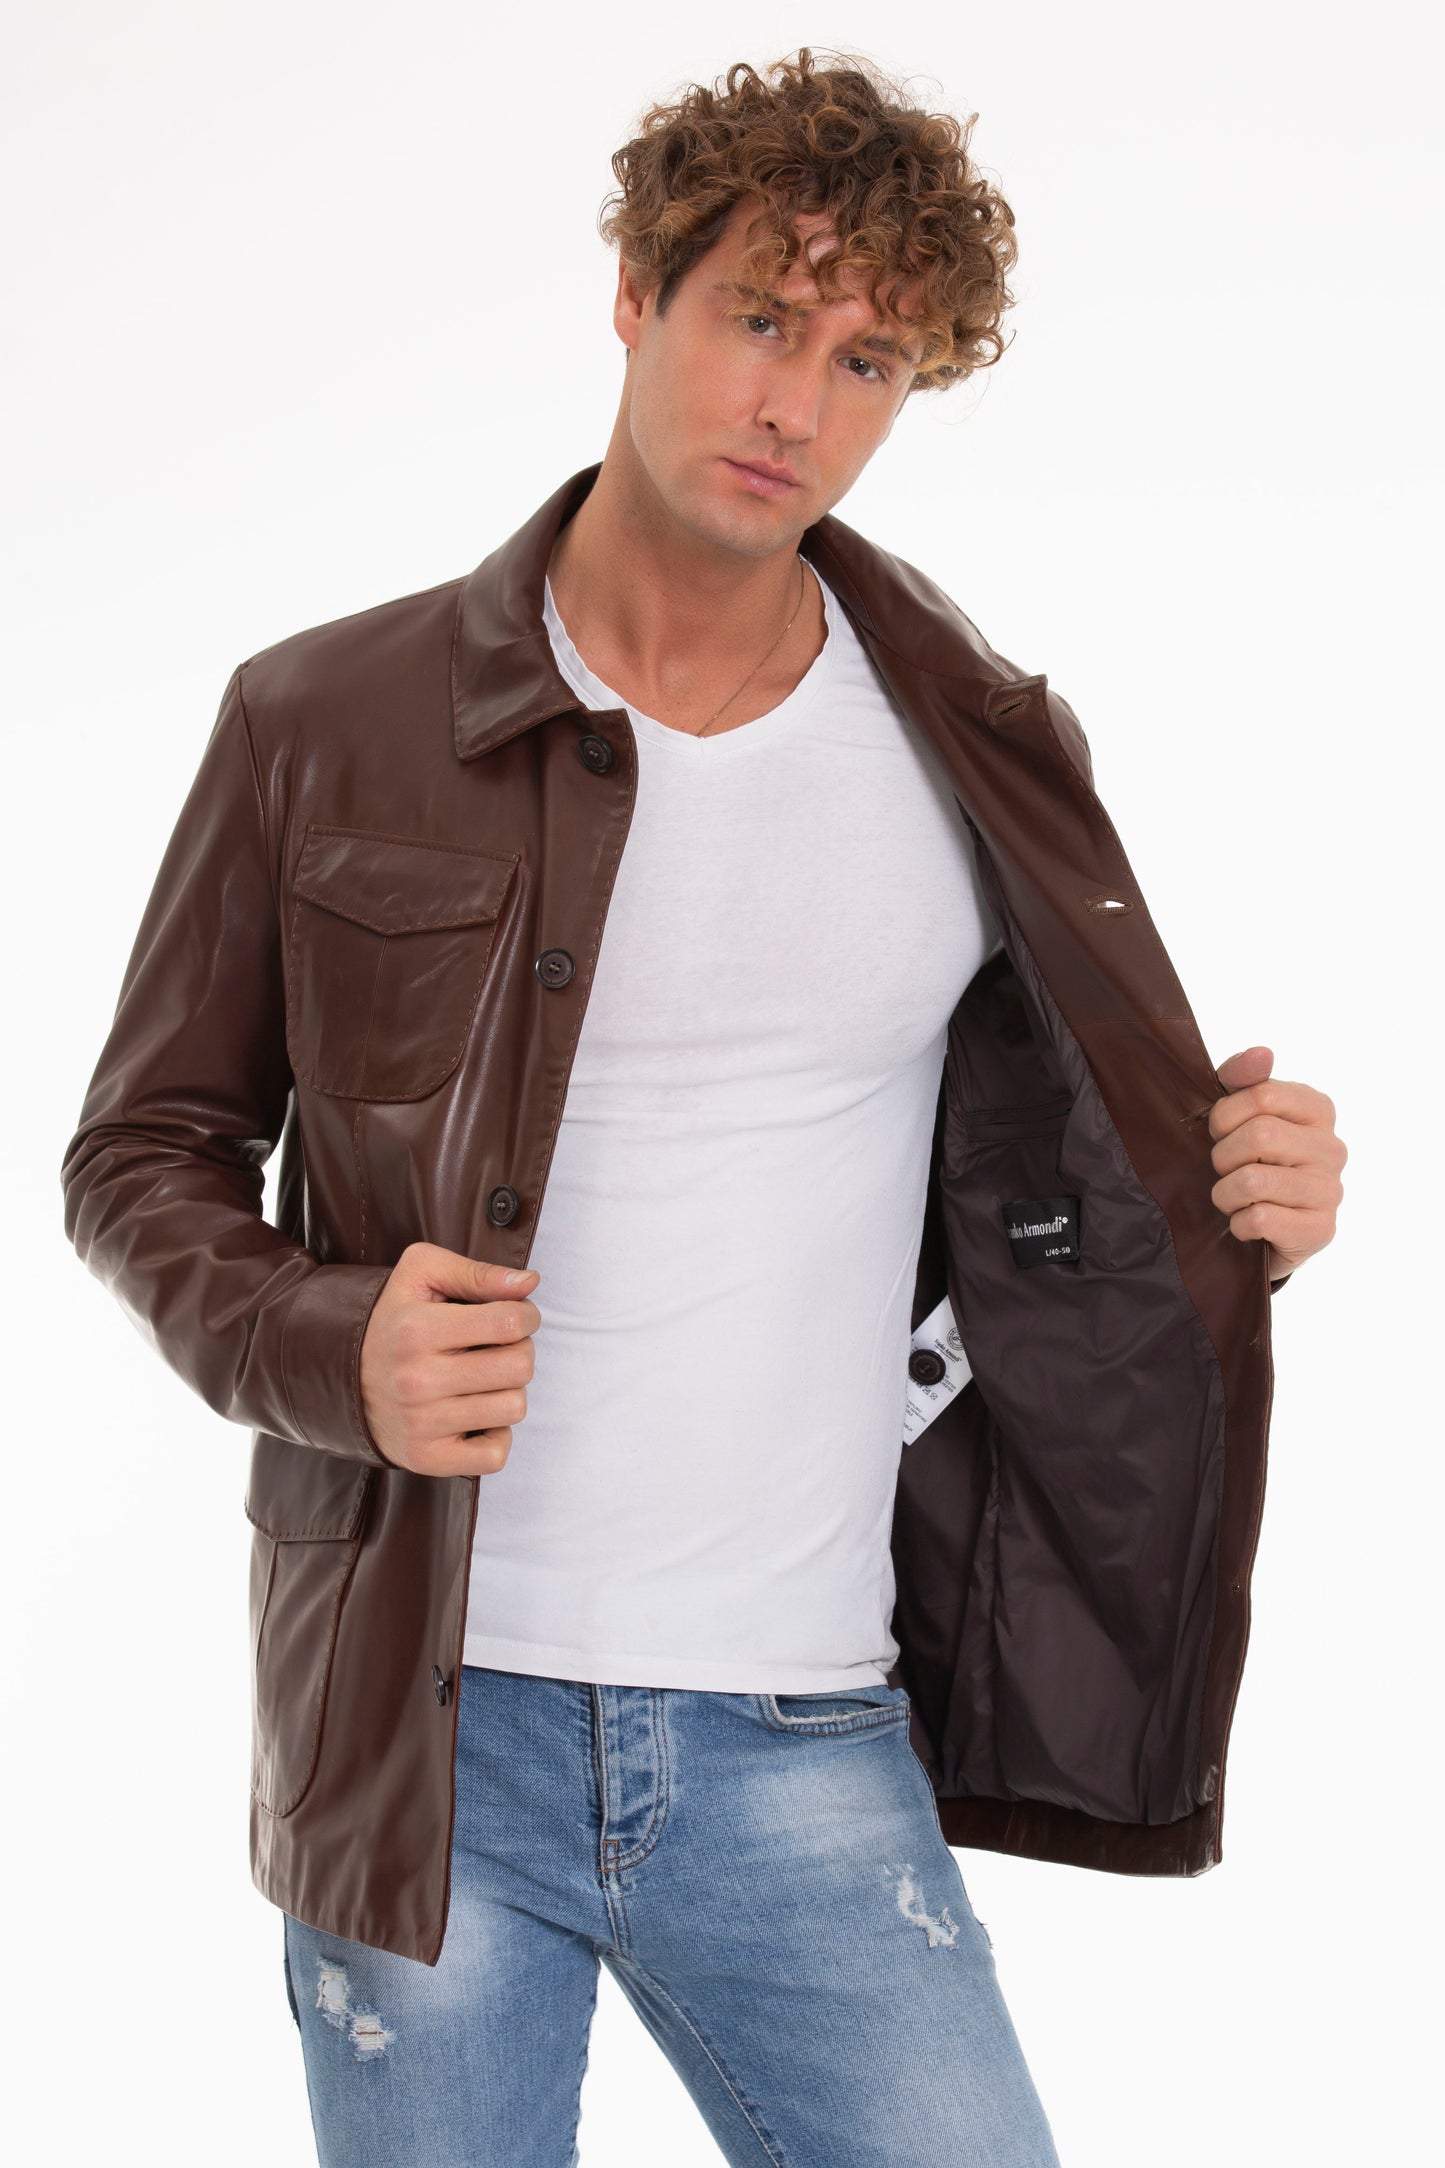 The Turro Brown Leather Men Jacket